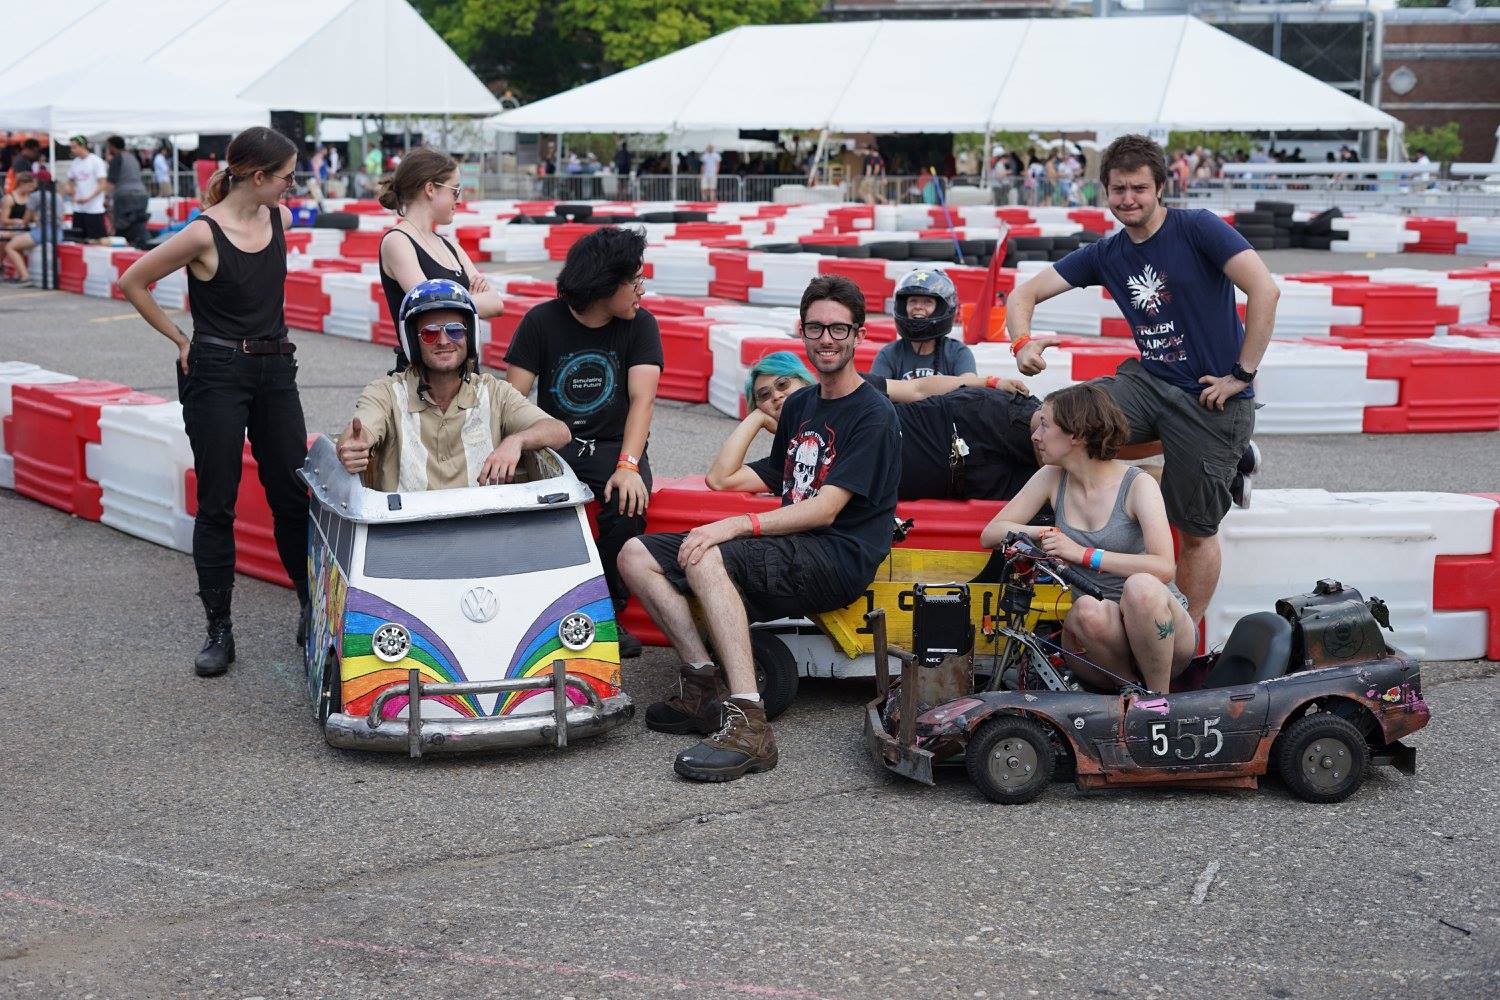 MITERS Silly Gokarts Racing Team